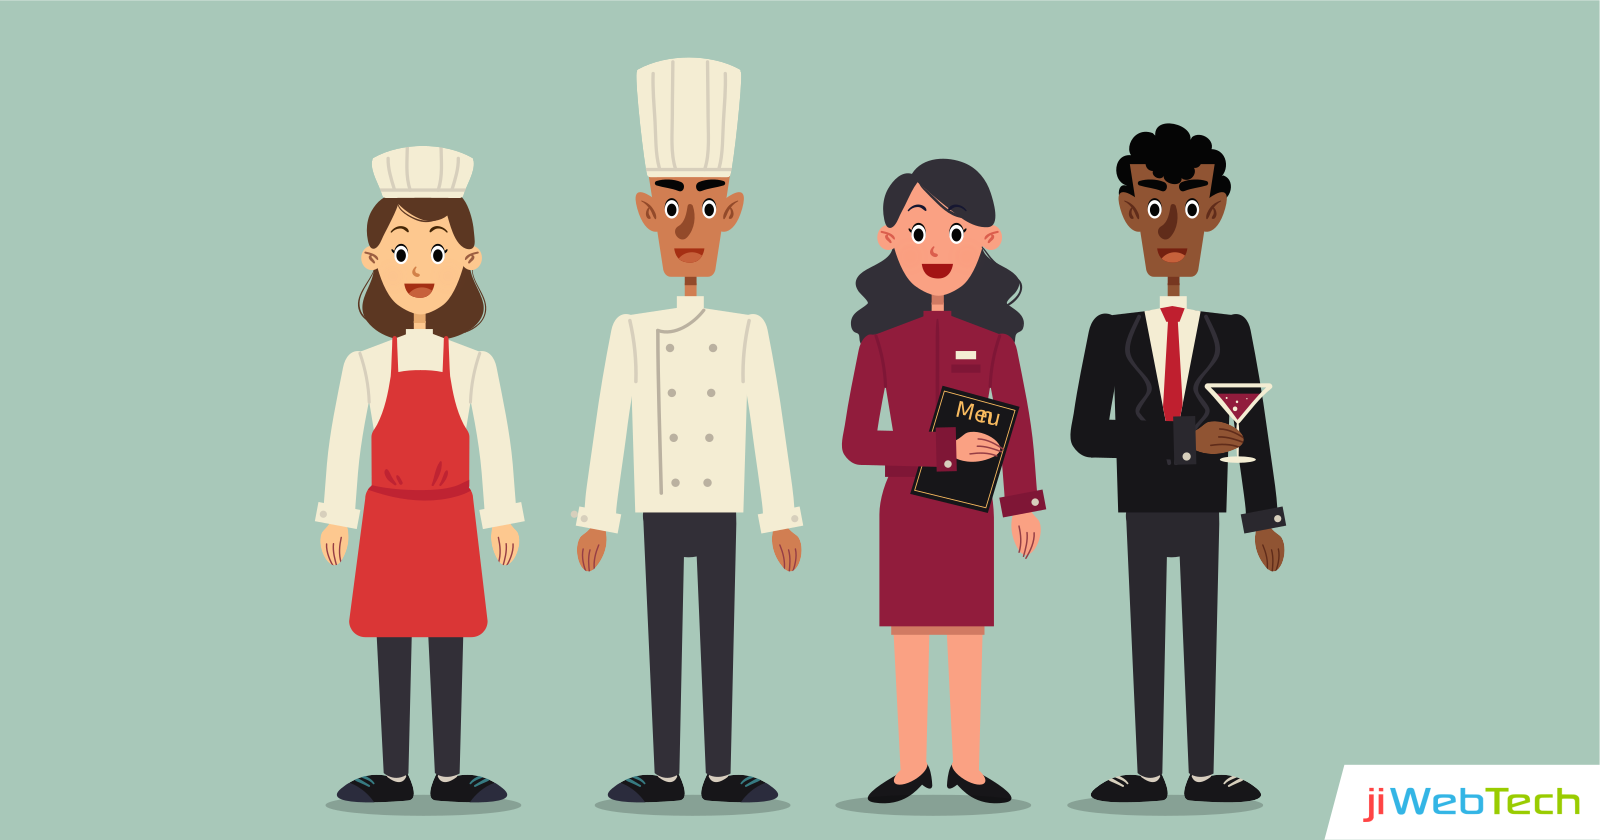 Build a Great Team With These Effective Restaurant Staff Management Tips